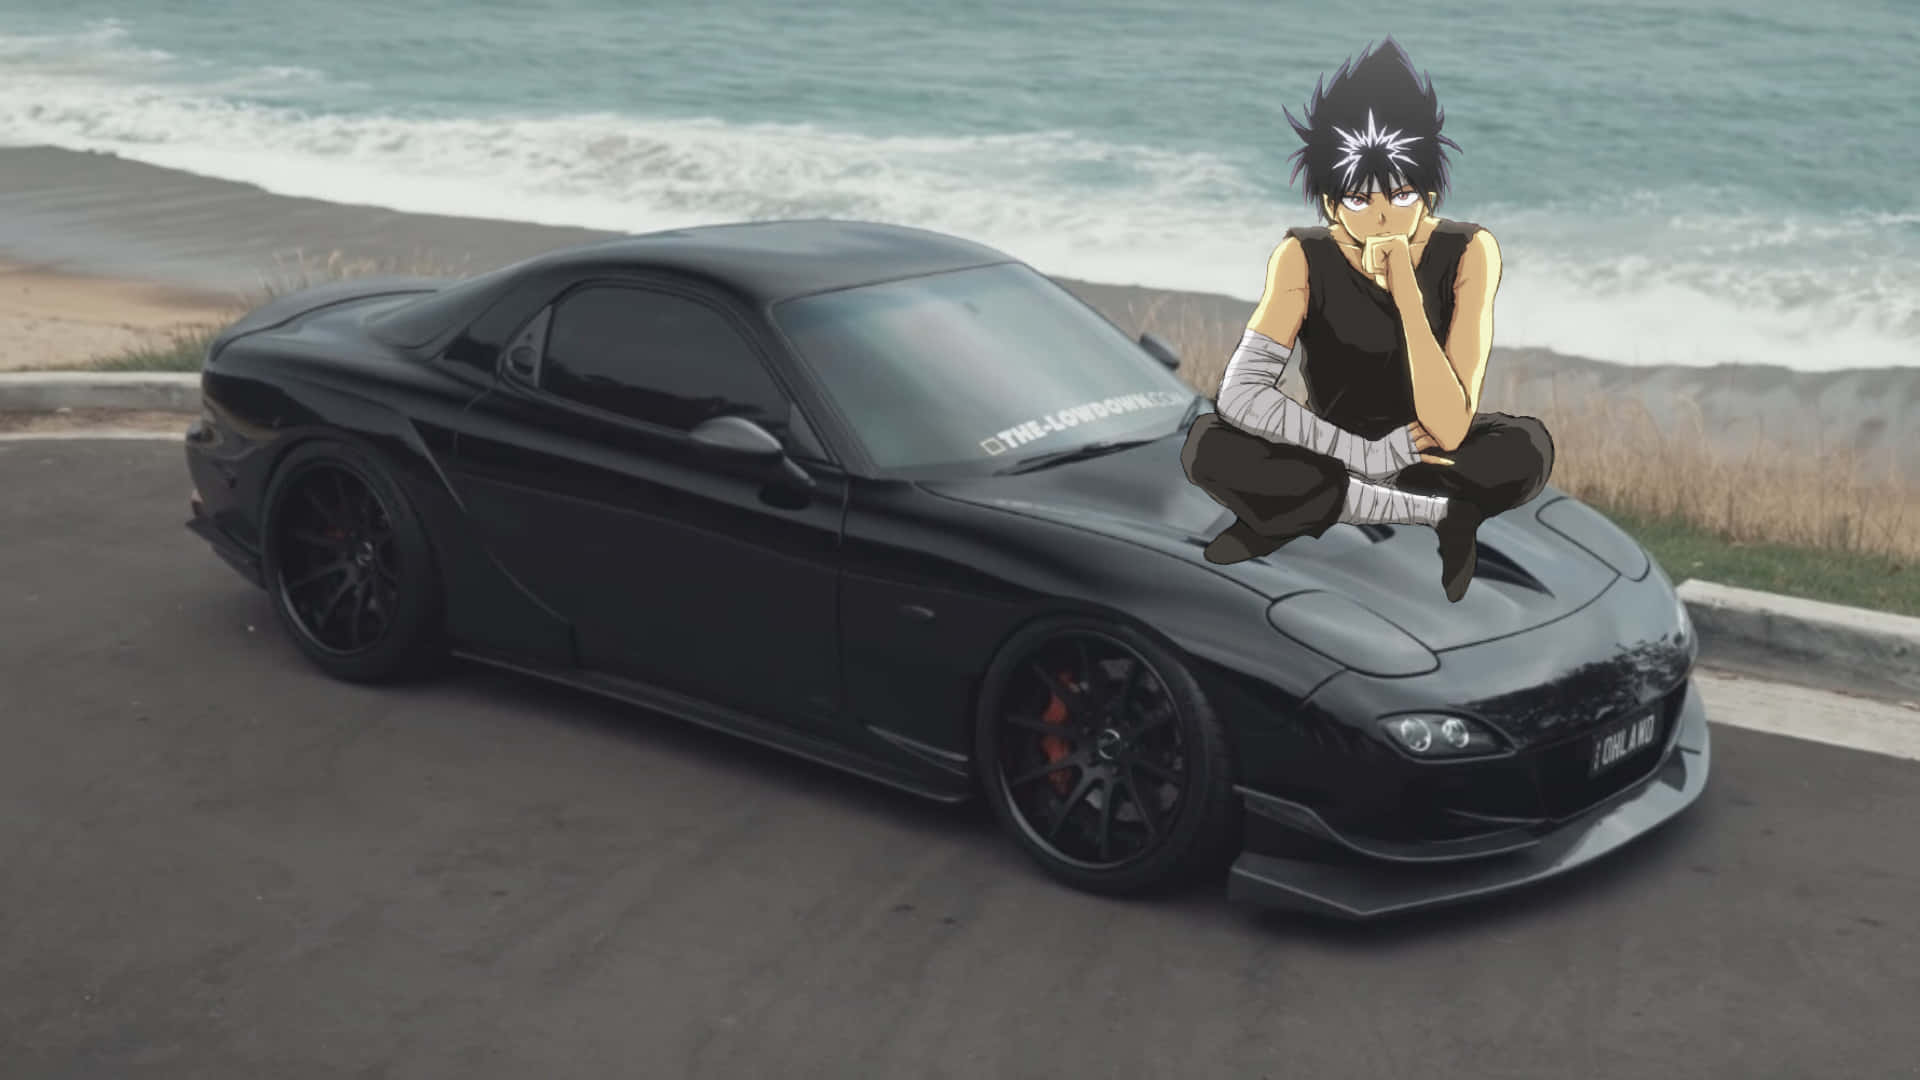 HD jdm with anime girl wallpapers | Peakpx